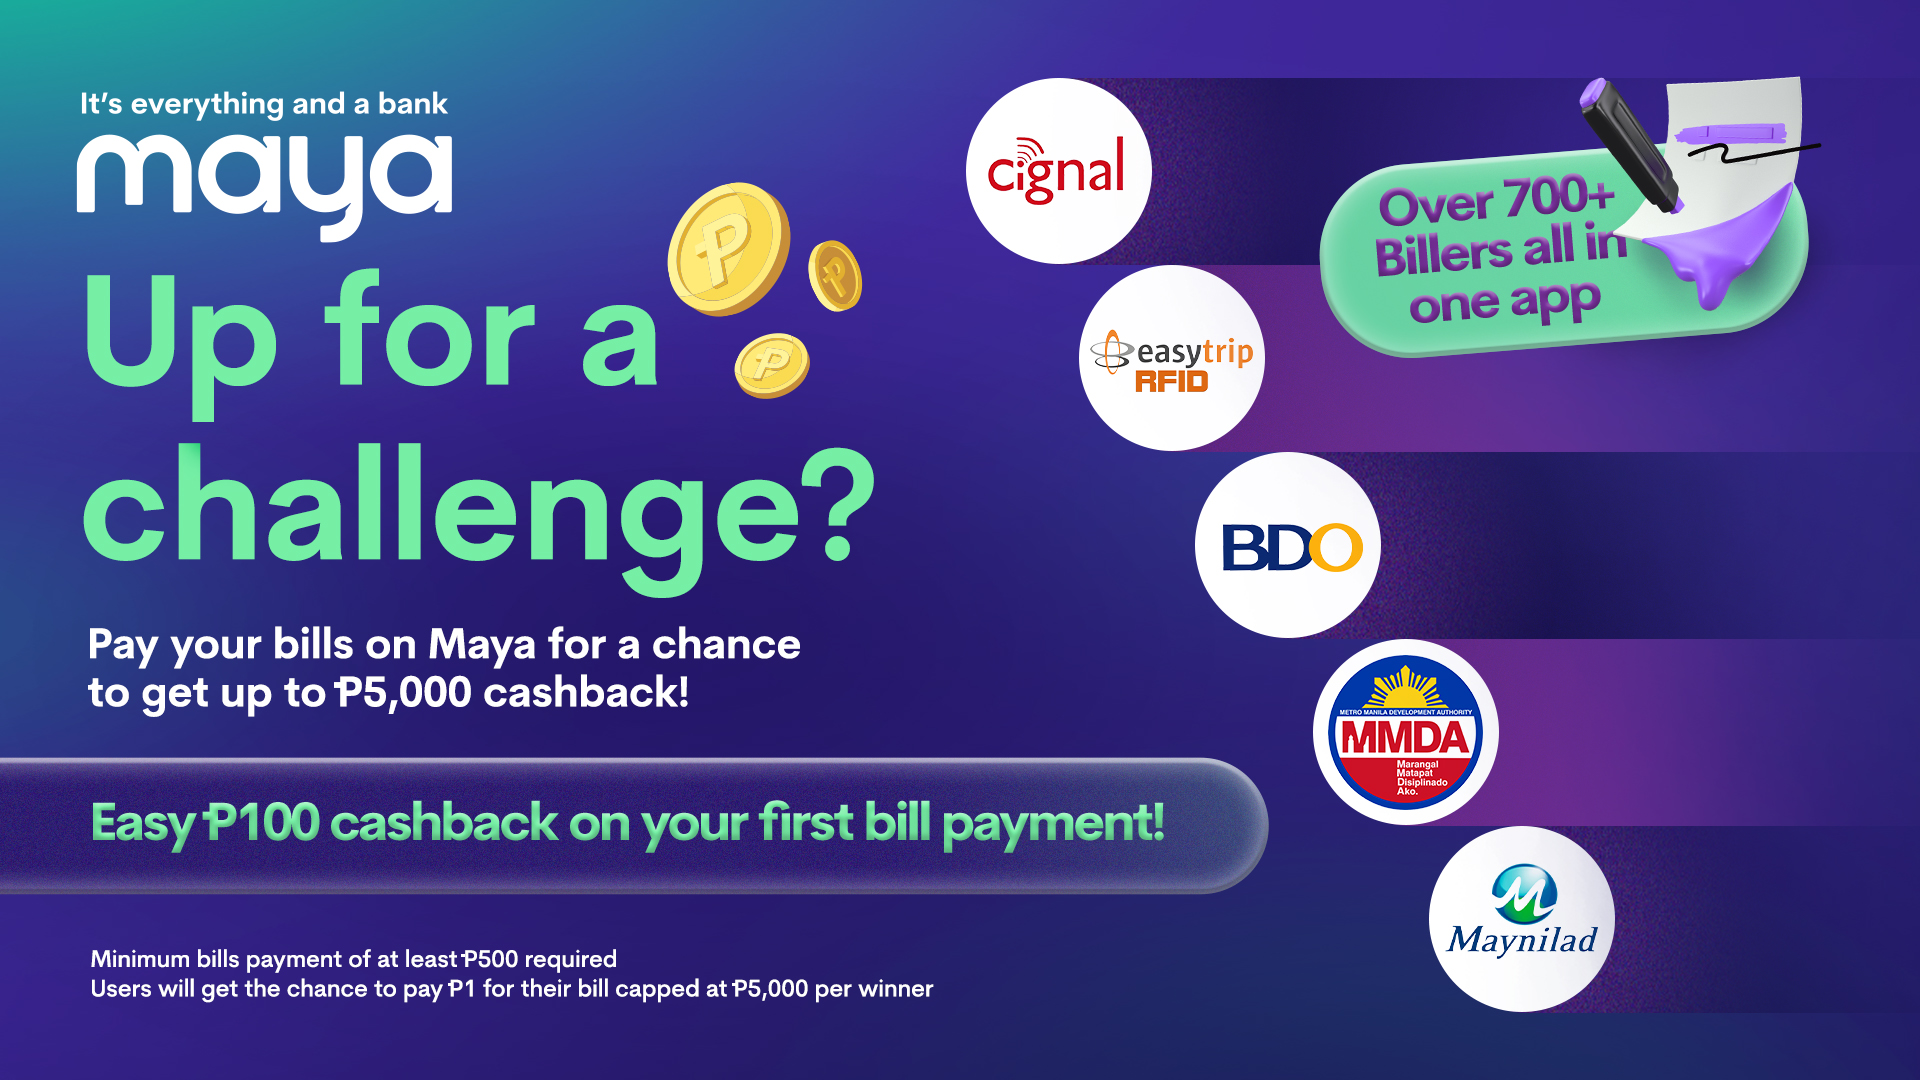 Get a chance to pay your bill for P1!